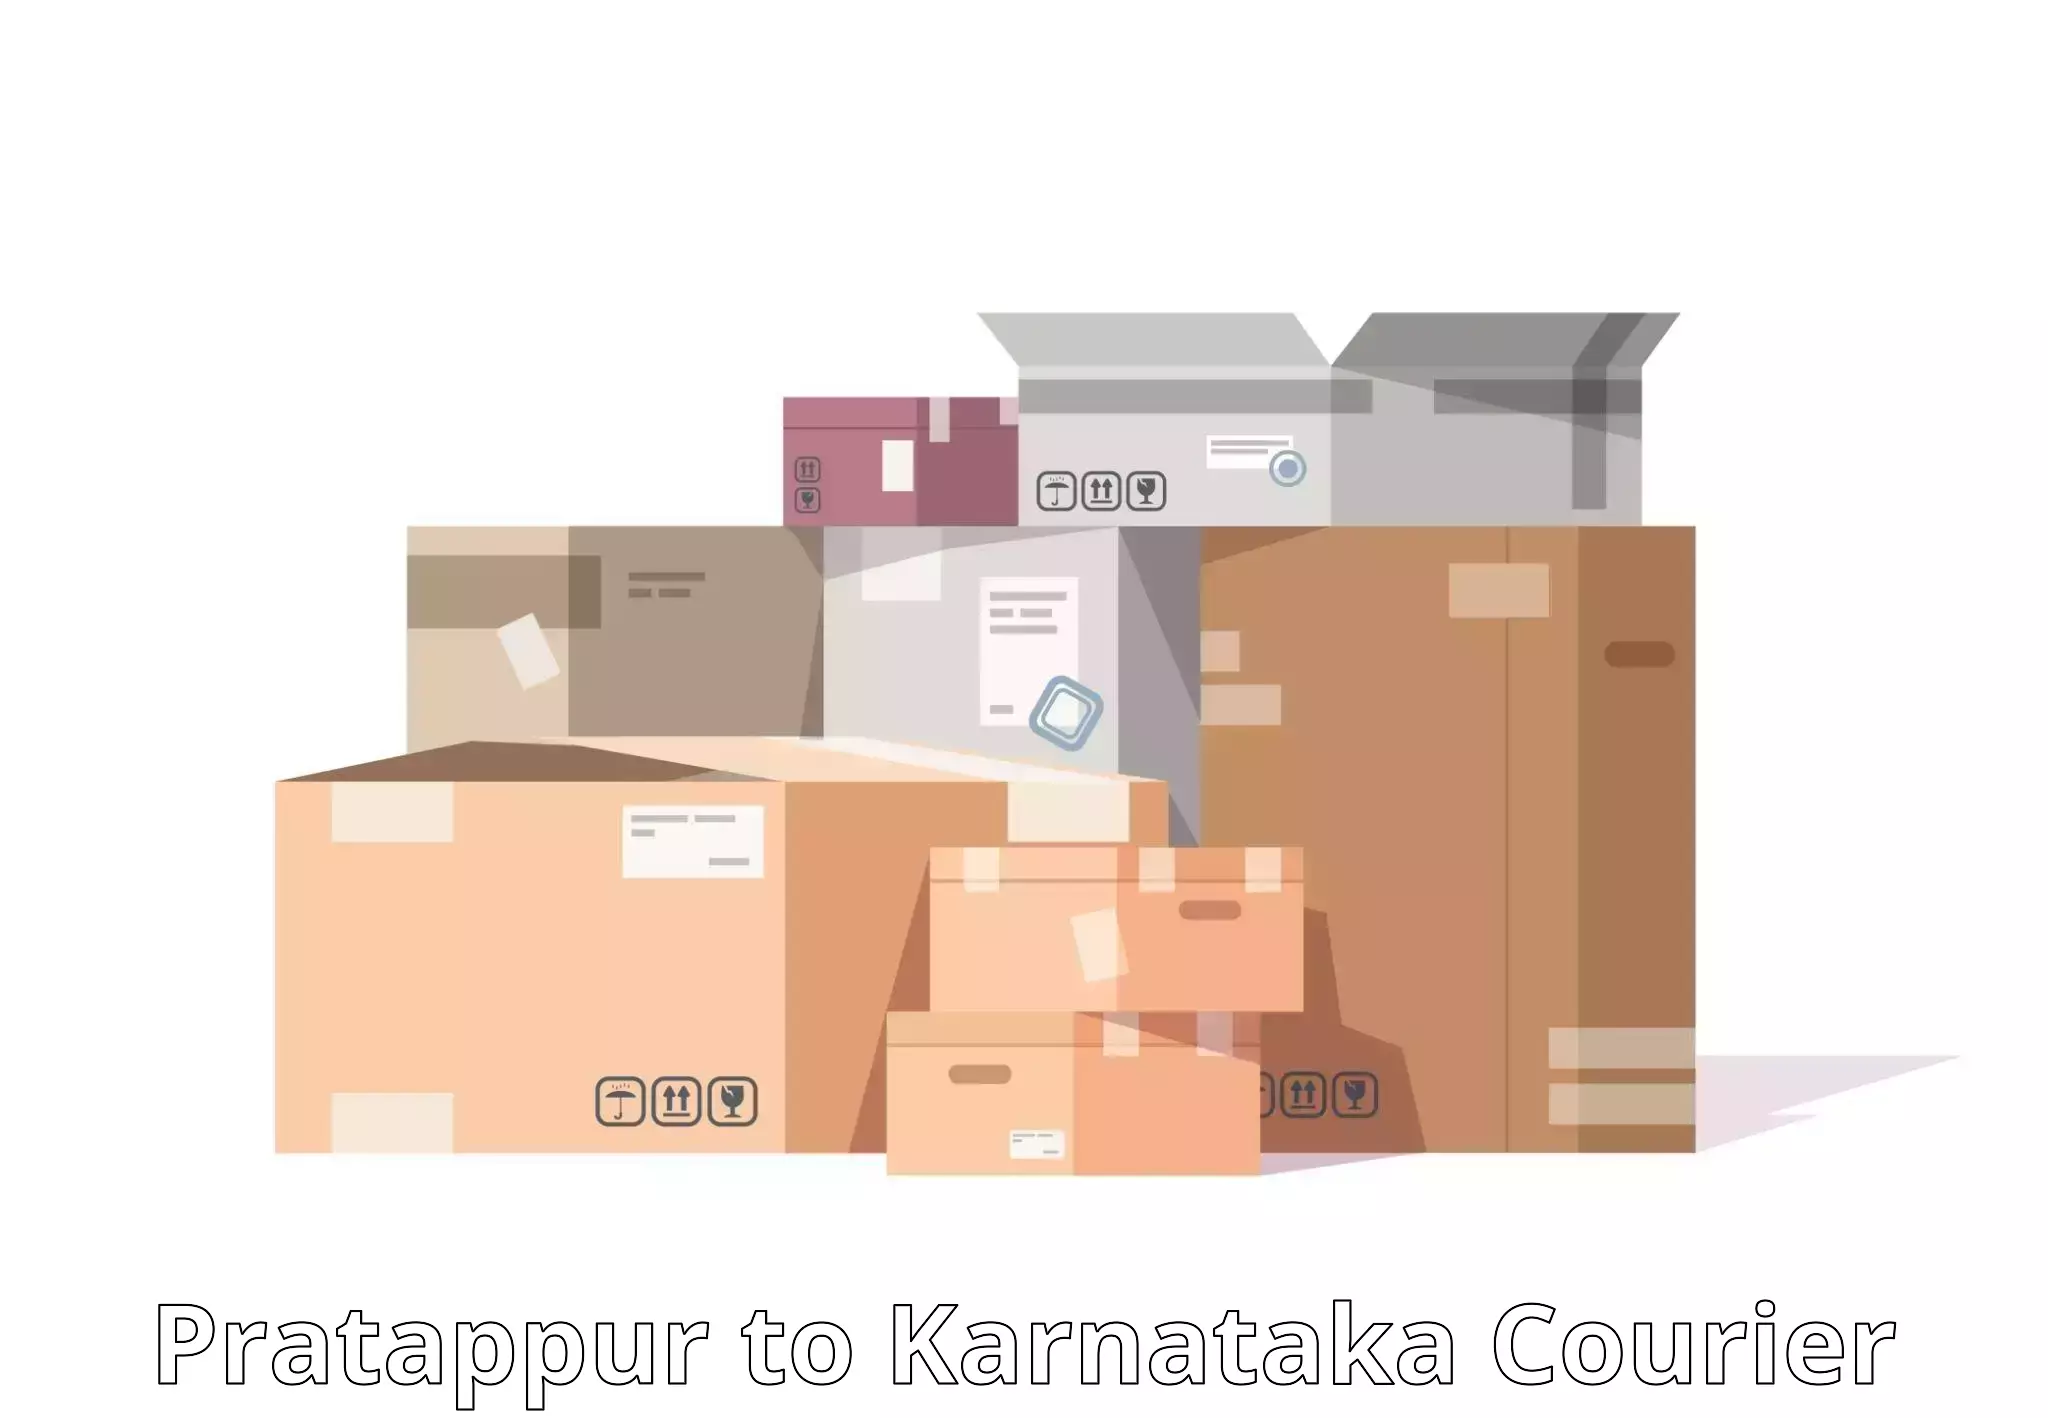 Full-service courier options Pratappur to Yellare